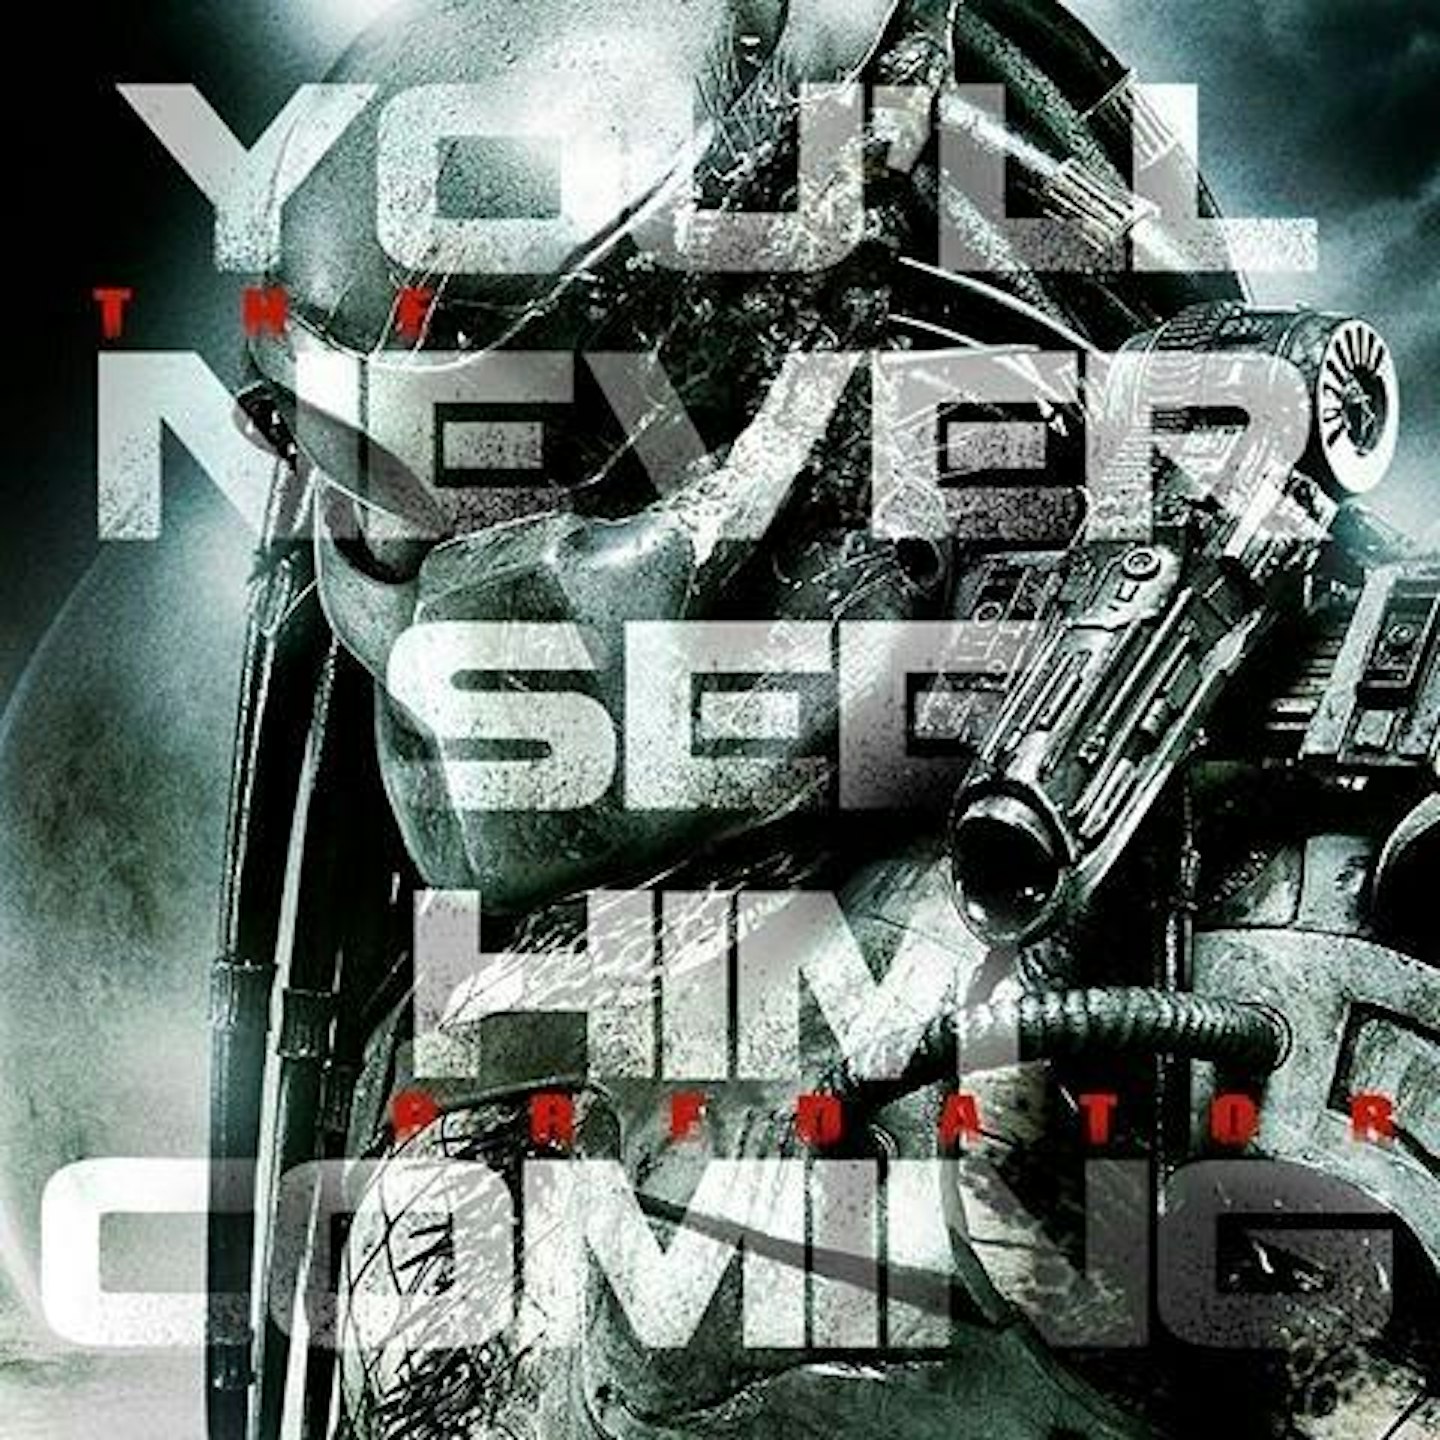 First teaser image for The Predator